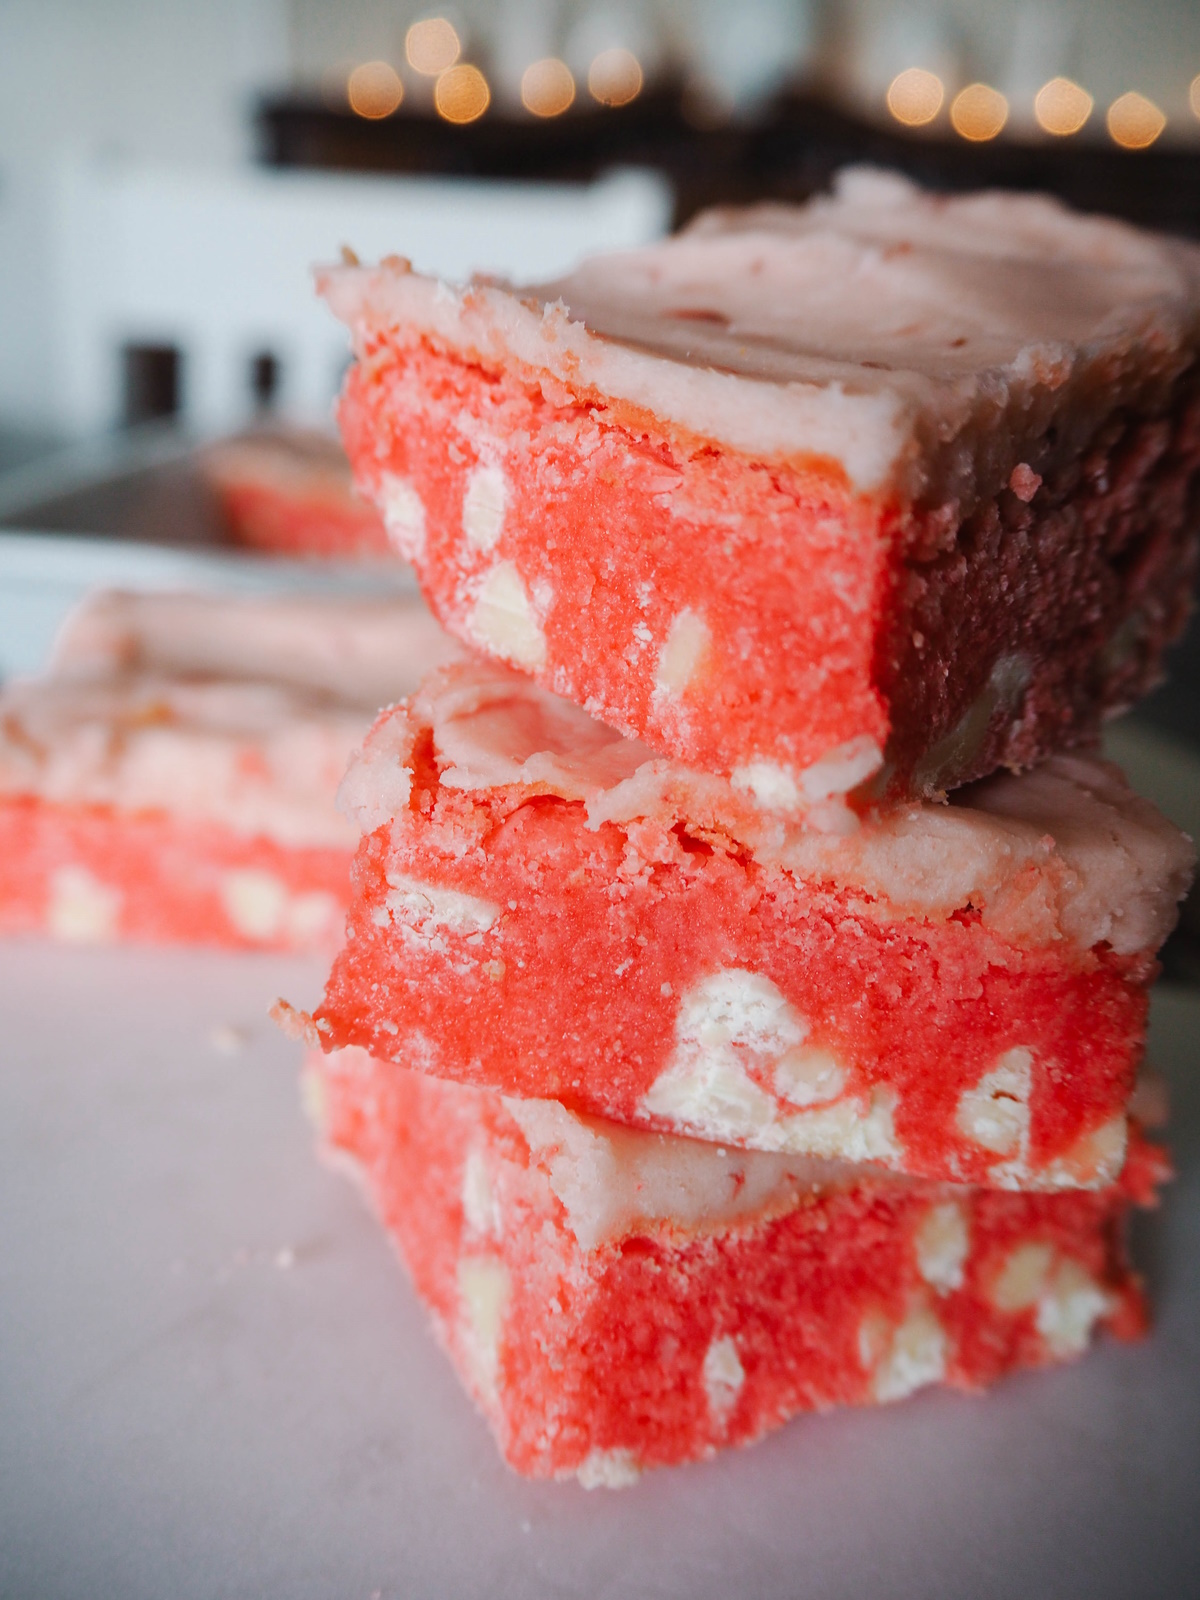 How to Make Strawberry Crunch Bars